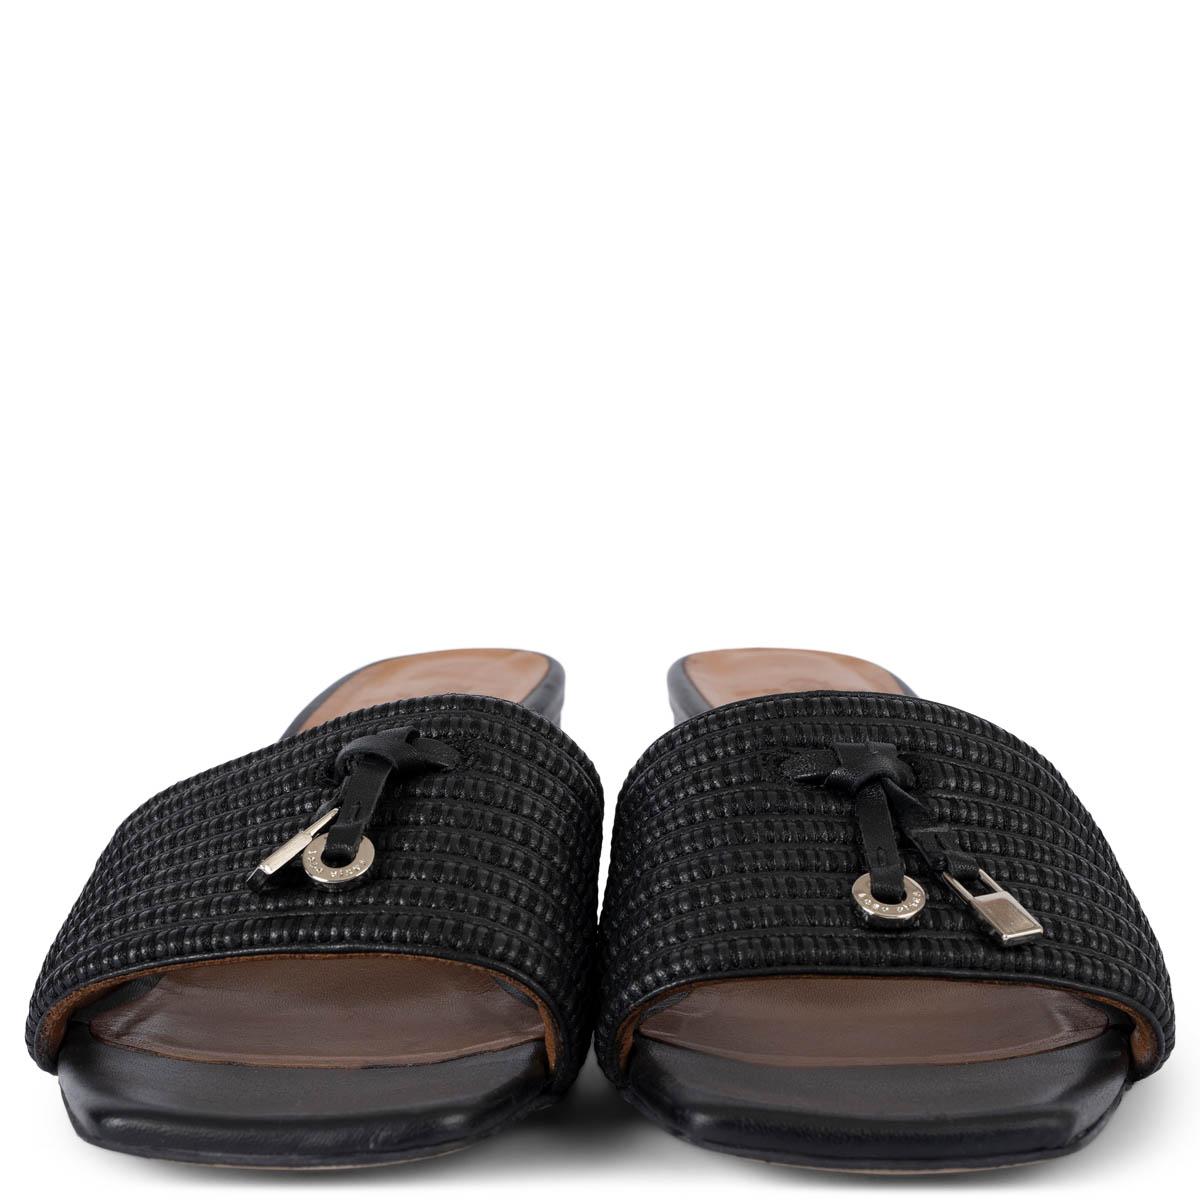 100% authentic Loro Piana Summer Walk mules in black leather and raffia. The slip-on style is accessorized with silver-toned logo-engraved charms and sits atop chunky block heels. Have been worn and are in excellent condition.